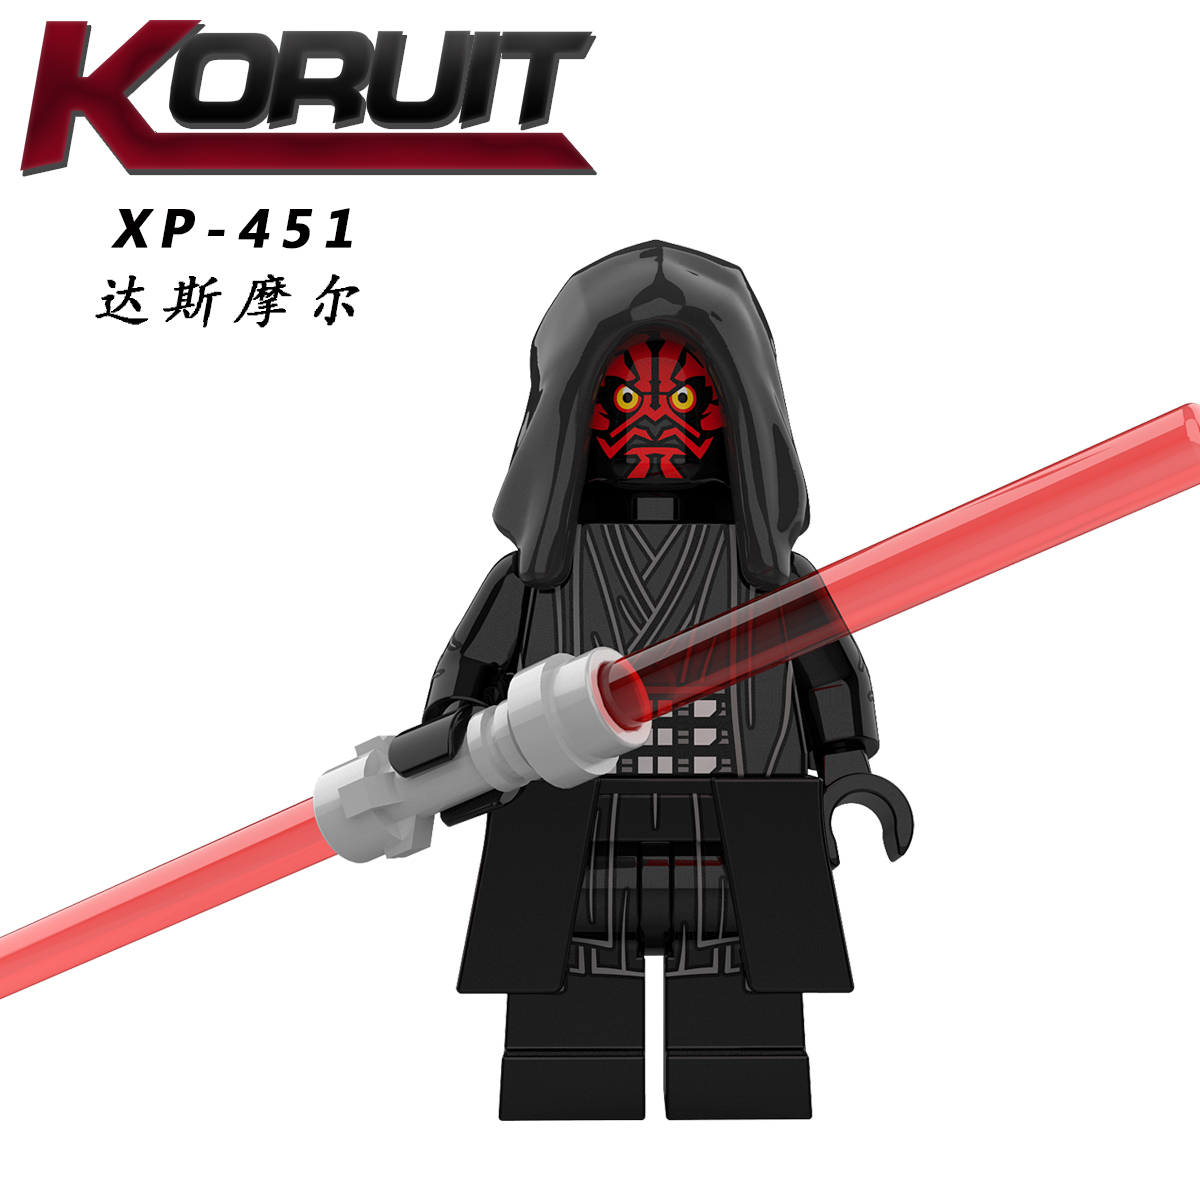 KT1059 XP451 XP452 XP453 XP454 XP455 XP456 XP457 XP458 Star Wars  Darth Maul Obi Wan Anakin Movie Series Building Blocks Action Figures Educational Toys For Kids Gifts